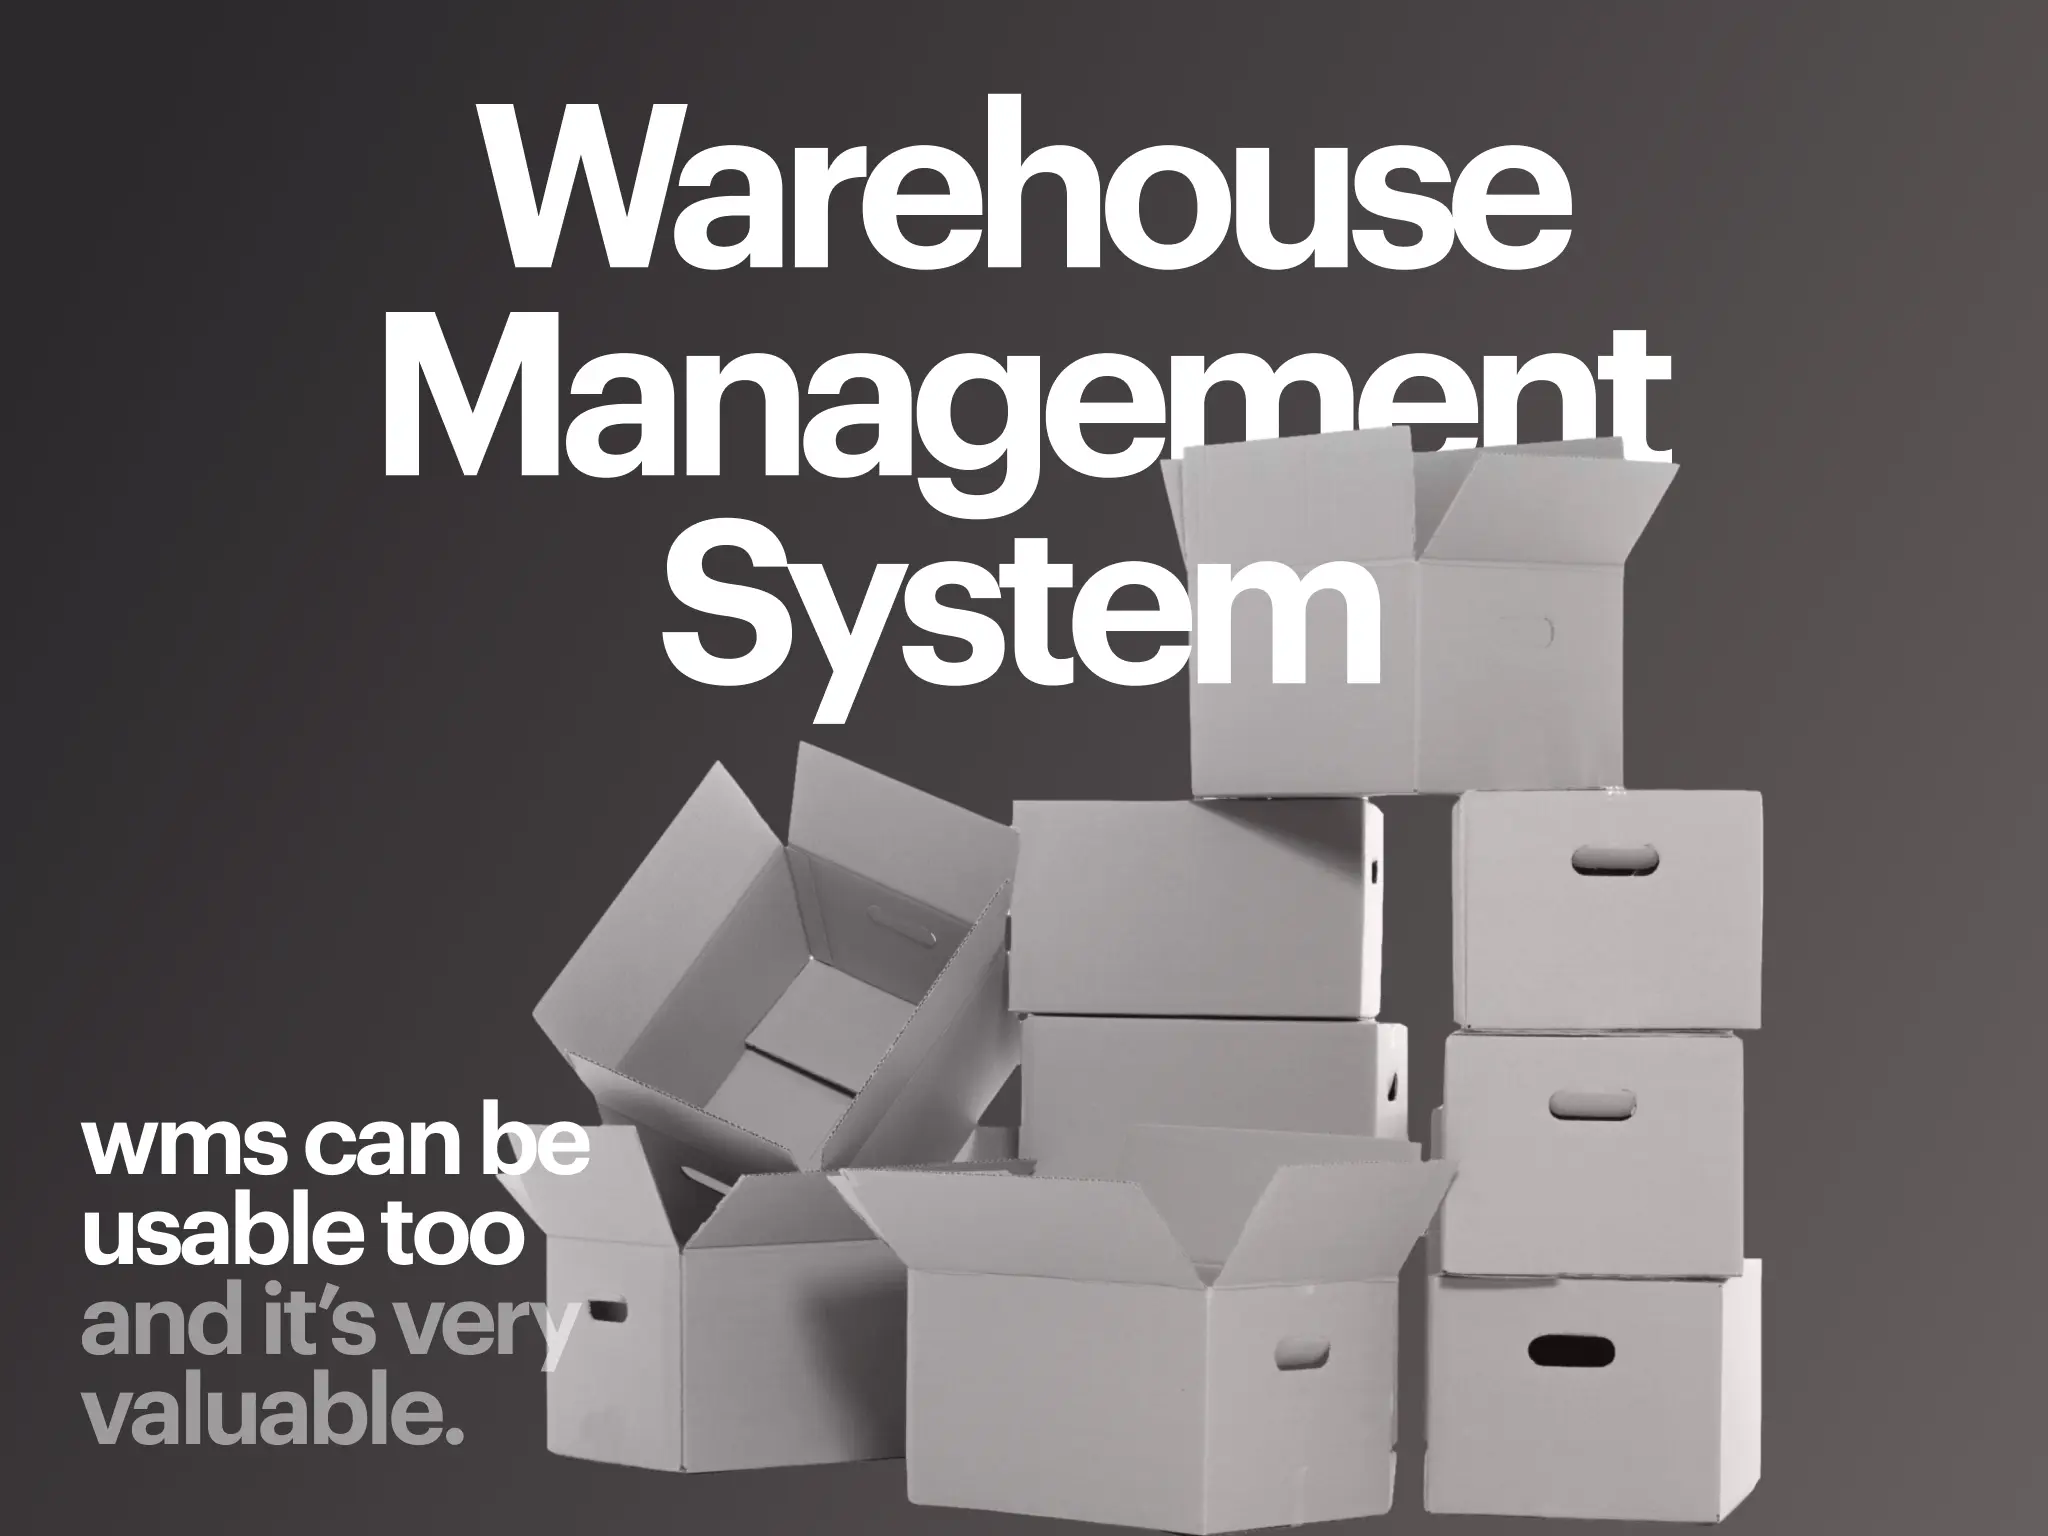 warehouse management system ux design case study by agroudy